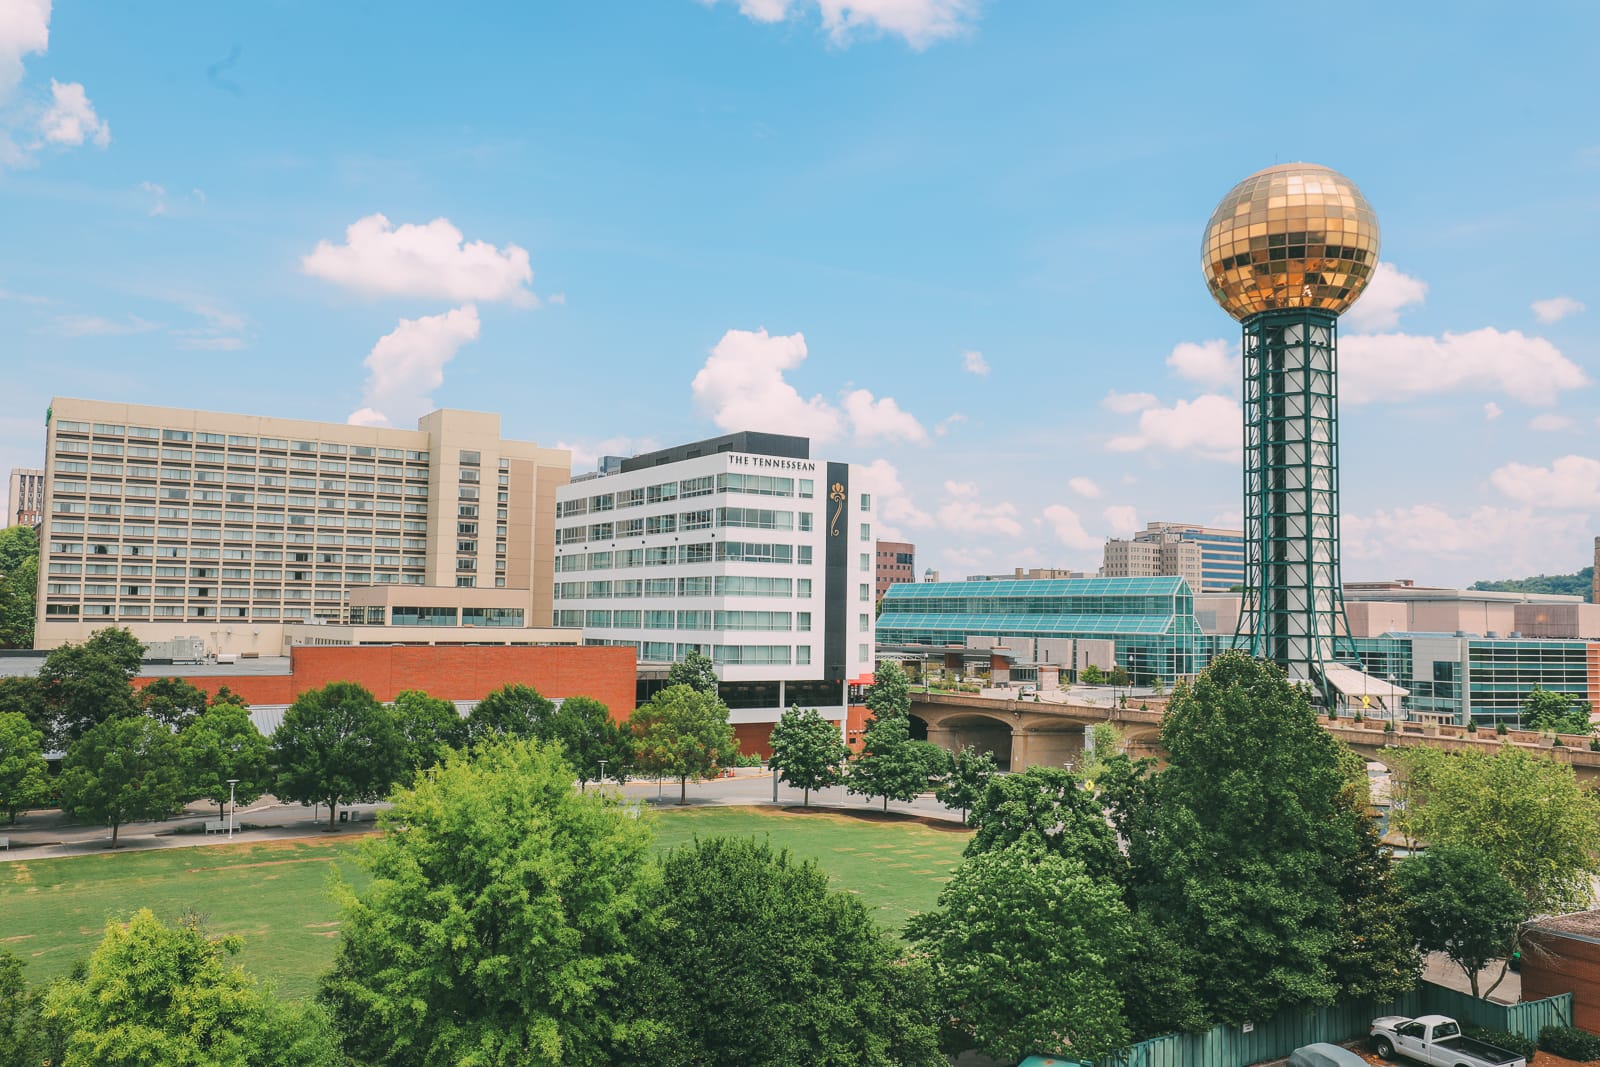 efresh your romantic vibes in Knoxville, Tennessee